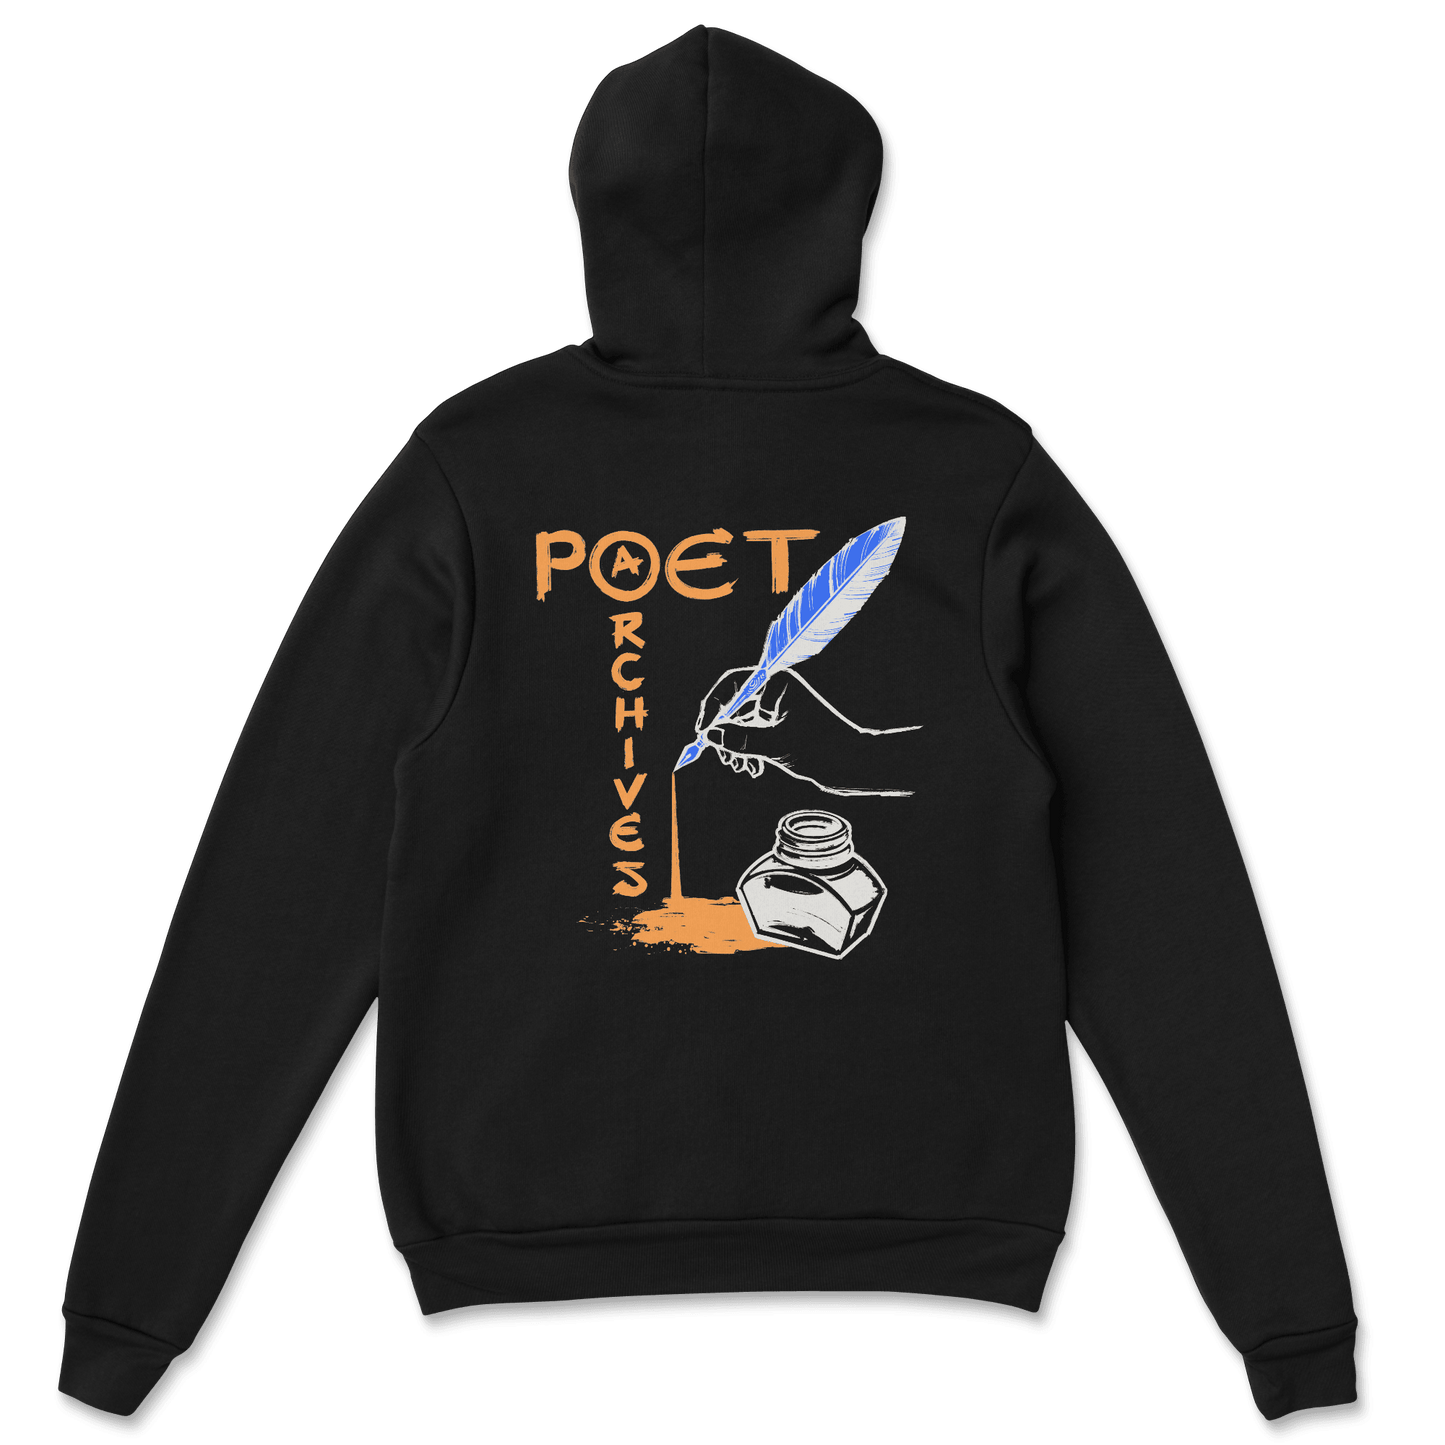 Quill Hoodie - Poet Archives